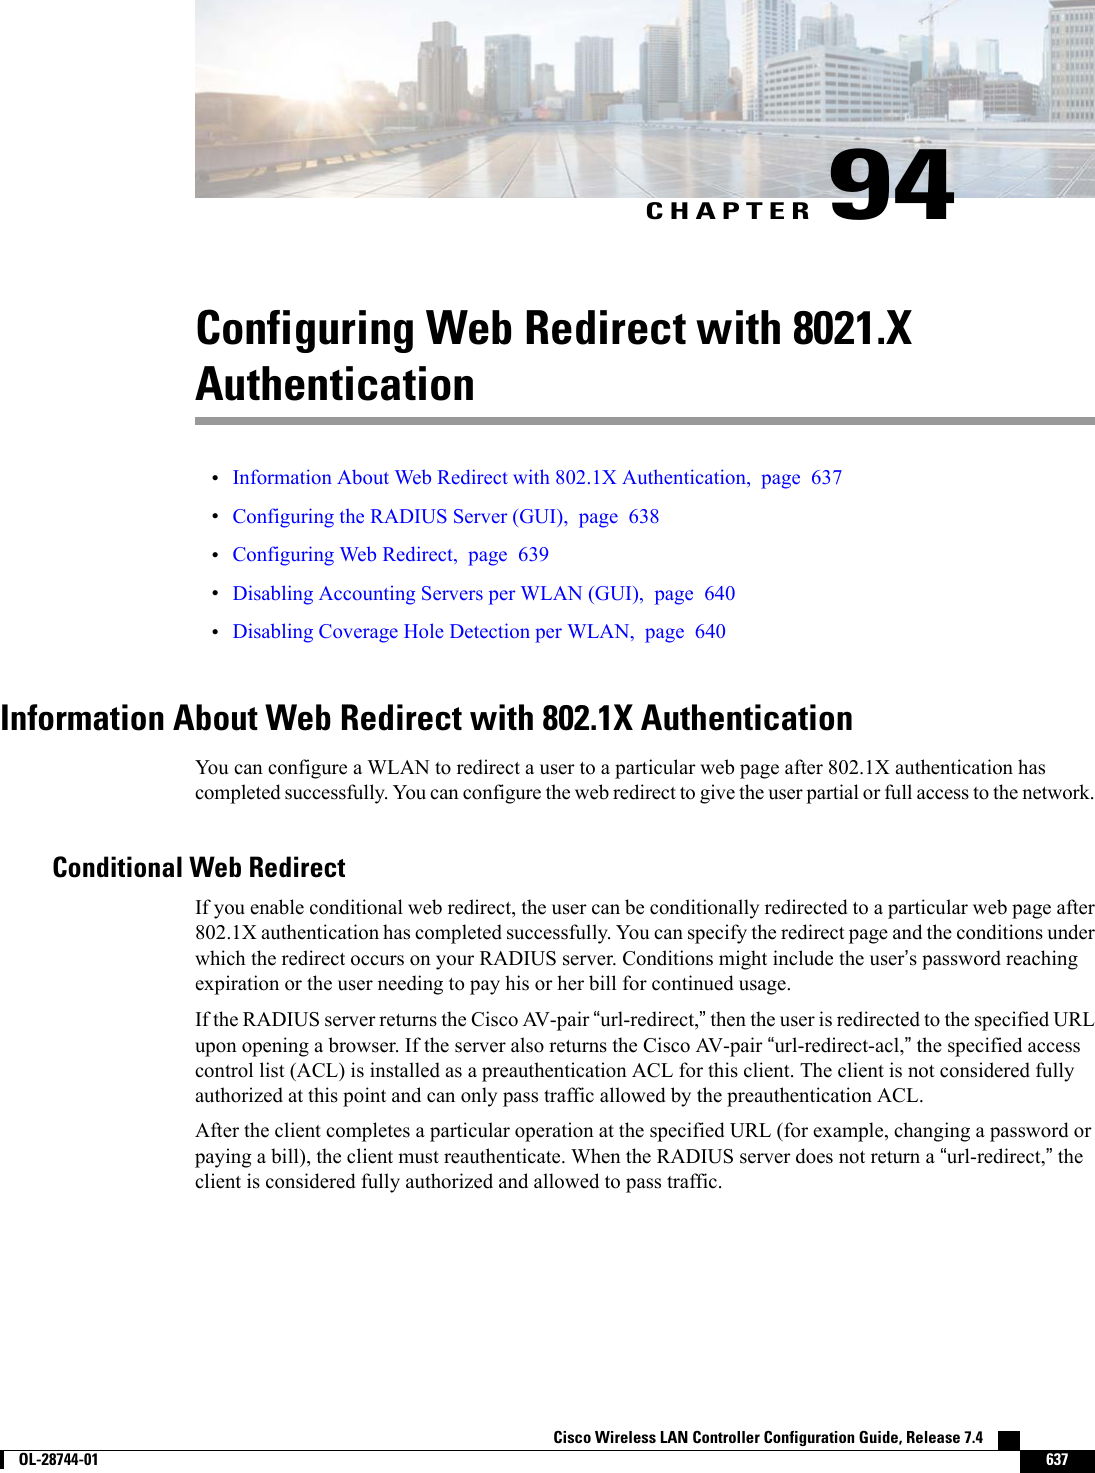 CHAPTER 94Configuring Web Redirect with 8021.XAuthentication•Information About Web Redirect with 802.1X Authentication, page 637•Configuring the RADIUS Server (GUI), page 638•Configuring Web Redirect, page 639•Disabling Accounting Servers per WLAN (GUI), page 640•Disabling Coverage Hole Detection per WLAN, page 640Information About Web Redirect with 802.1X AuthenticationYou can configure a WLAN to redirect a user to a particular web page after 802.1X authentication hascompleted successfully. You can configure the web redirect to give the user partial or full access to the network.Conditional Web RedirectIf you enable conditional web redirect, the user can be conditionally redirected to a particular web page after802.1X authentication has completed successfully. You can specify the redirect page and the conditions underwhich the redirect occurs on your RADIUS server. Conditions might include the user’s password reachingexpiration or the user needing to pay his or her bill for continued usage.If the RADIUS server returns the Cisco AV-pair “url-redirect,”then the user is redirected to the specified URLupon opening a browser. If the server also returns the Cisco AV-pair “url-redirect-acl,”the specified accesscontrol list (ACL) is installed as a preauthentication ACL for this client. The client is not considered fullyauthorized at this point and can only pass traffic allowed by the preauthentication ACL.After the client completes a particular operation at the specified URL (for example, changing a password orpaying a bill), the client must reauthenticate. When the RADIUS server does not return a “url-redirect,”theclient is considered fully authorized and allowed to pass traffic.Cisco Wireless LAN Controller Configuration Guide, Release 7.4        OL-28744-01 637